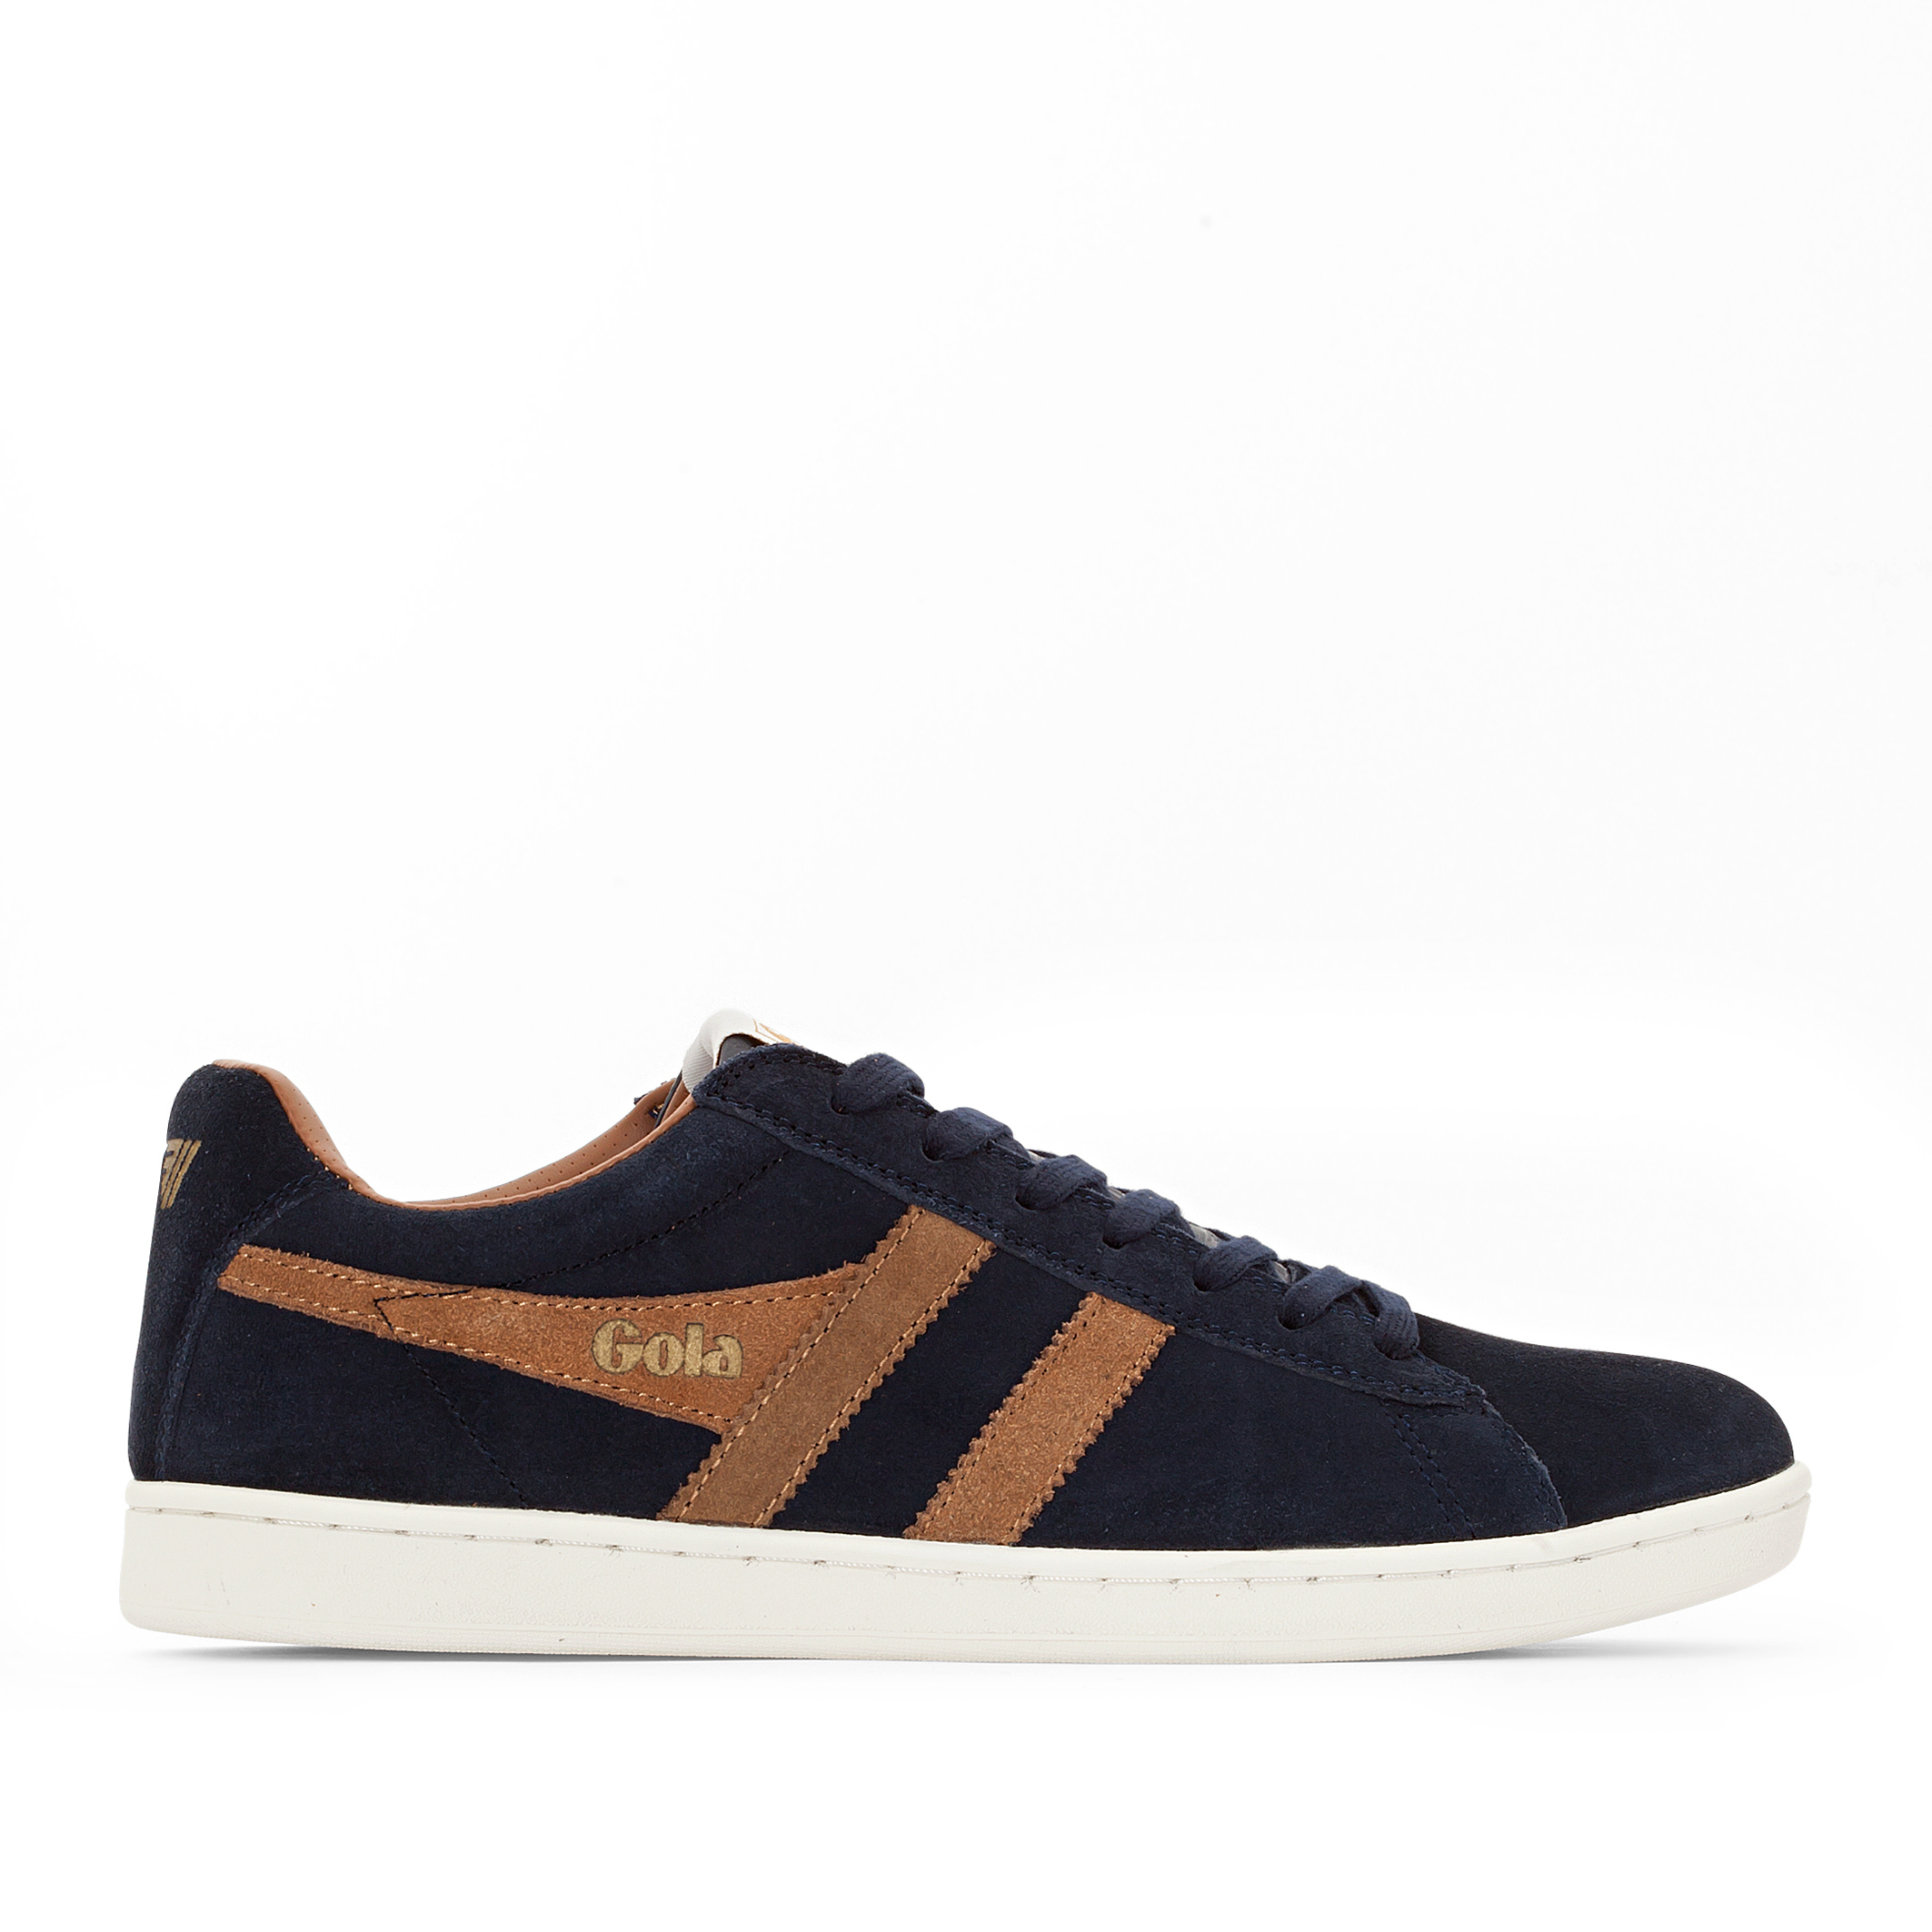 EQUIPE SUEDE Chaussures Gola Femme Chaussures homme Baskets homme Baskets basses 